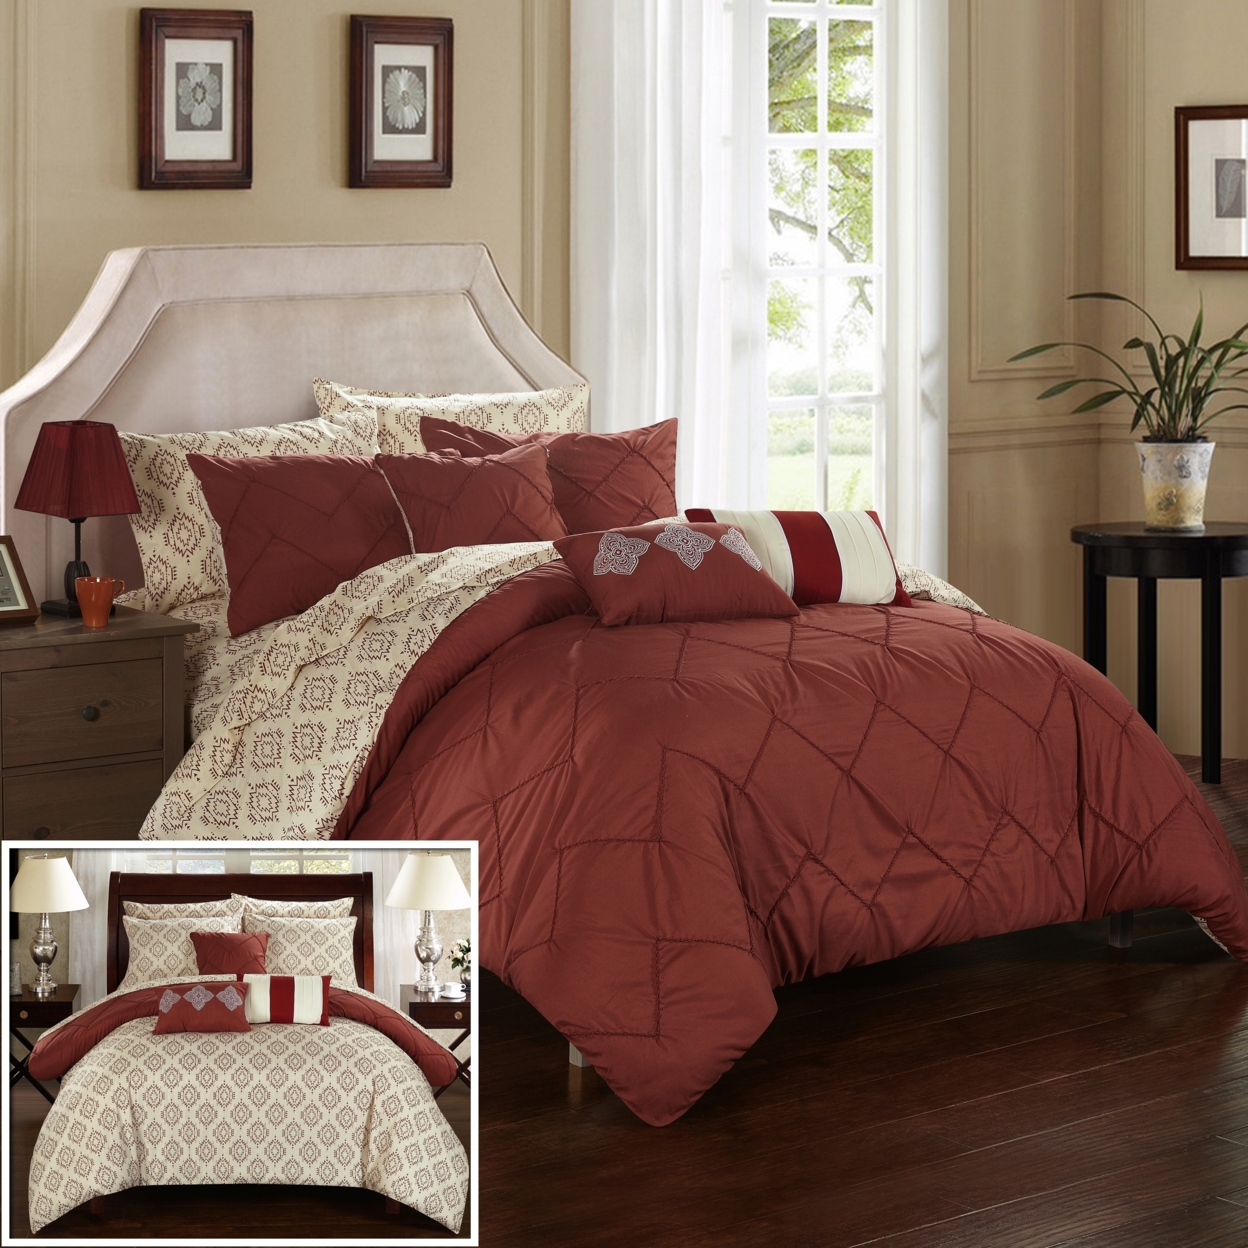 10 Piece Dahlia Rope Like Pinch Pleated REVERSIBLE Oversized And Overfilled Bed In A Bag Comforter Set With Sheet Set - Marsala, Queen